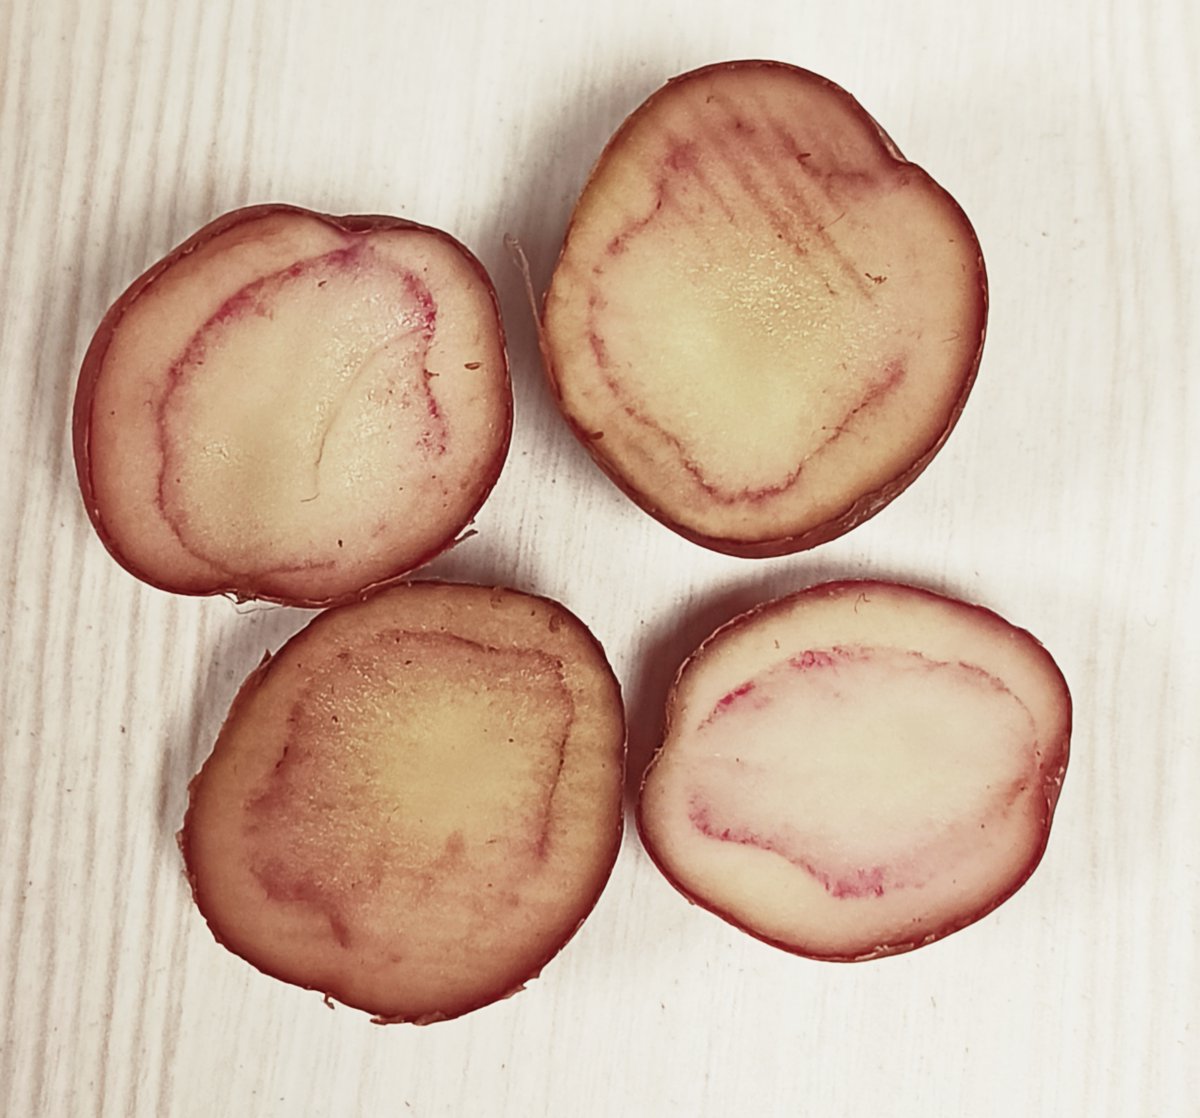 Petite & reddish on the outside, this is how these unique potatoes looks from inside. They are from Nawabganj, a small town in UP's Barabanki district. Tasty any which way you cook, more when shallow fried with the spice of your choice #NawabganjPotatoes @pra0902 @SushilAaron